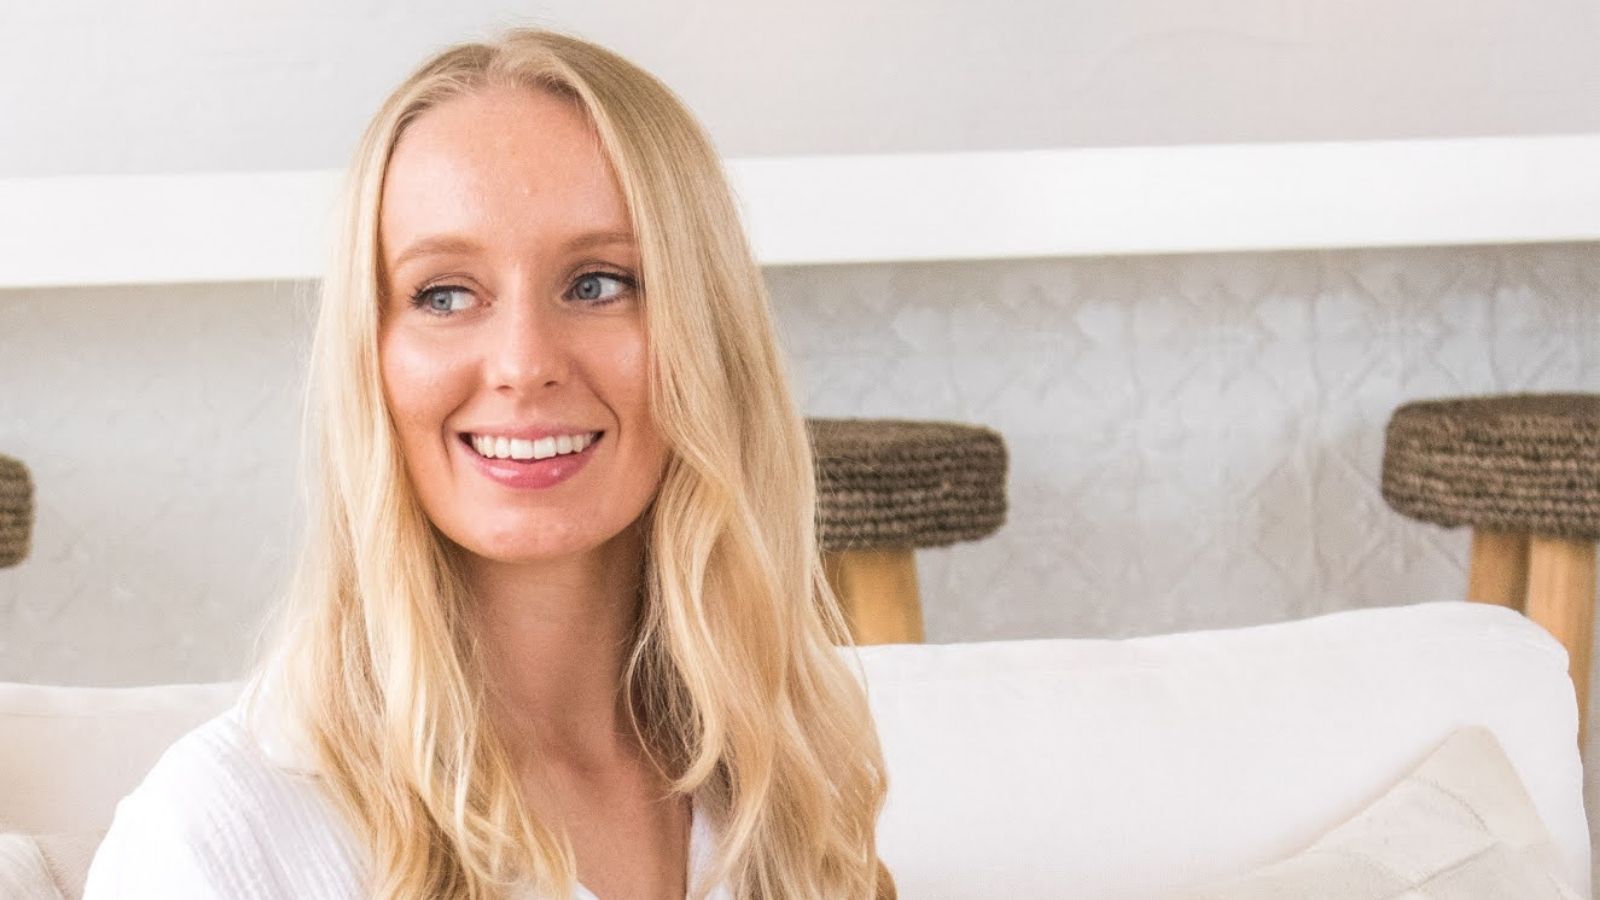 Jessica Williamson of Ete Swimwear: How To Successfully Ride The Emotional Highs & Lows Of Being An Entrepreneur